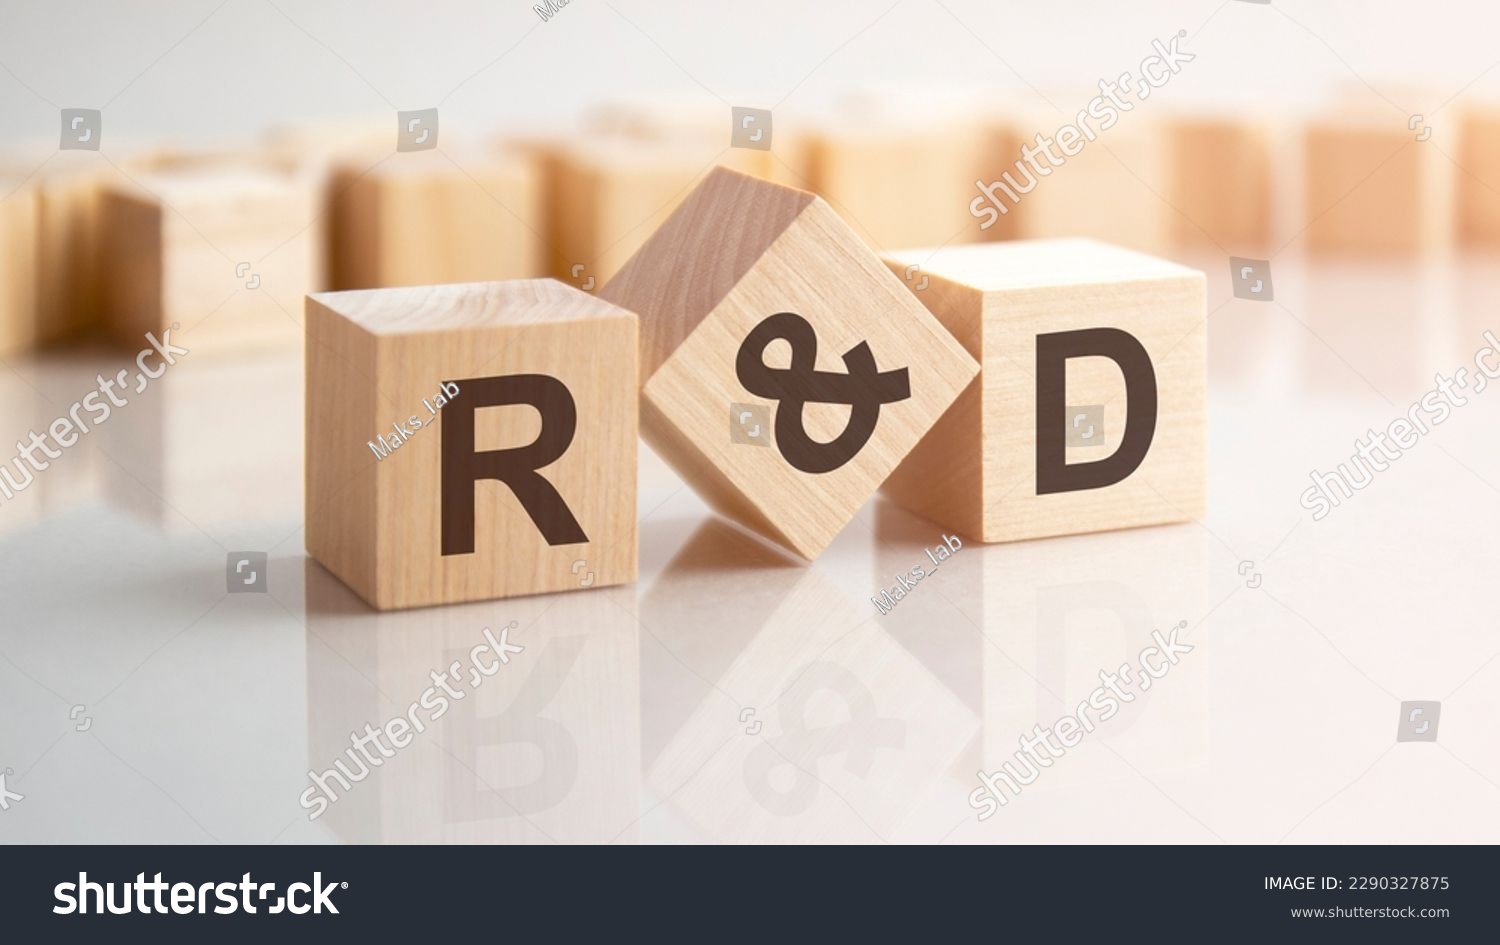 word R and D made with wood building blocks, stock image. background may have blur effect #2290327875